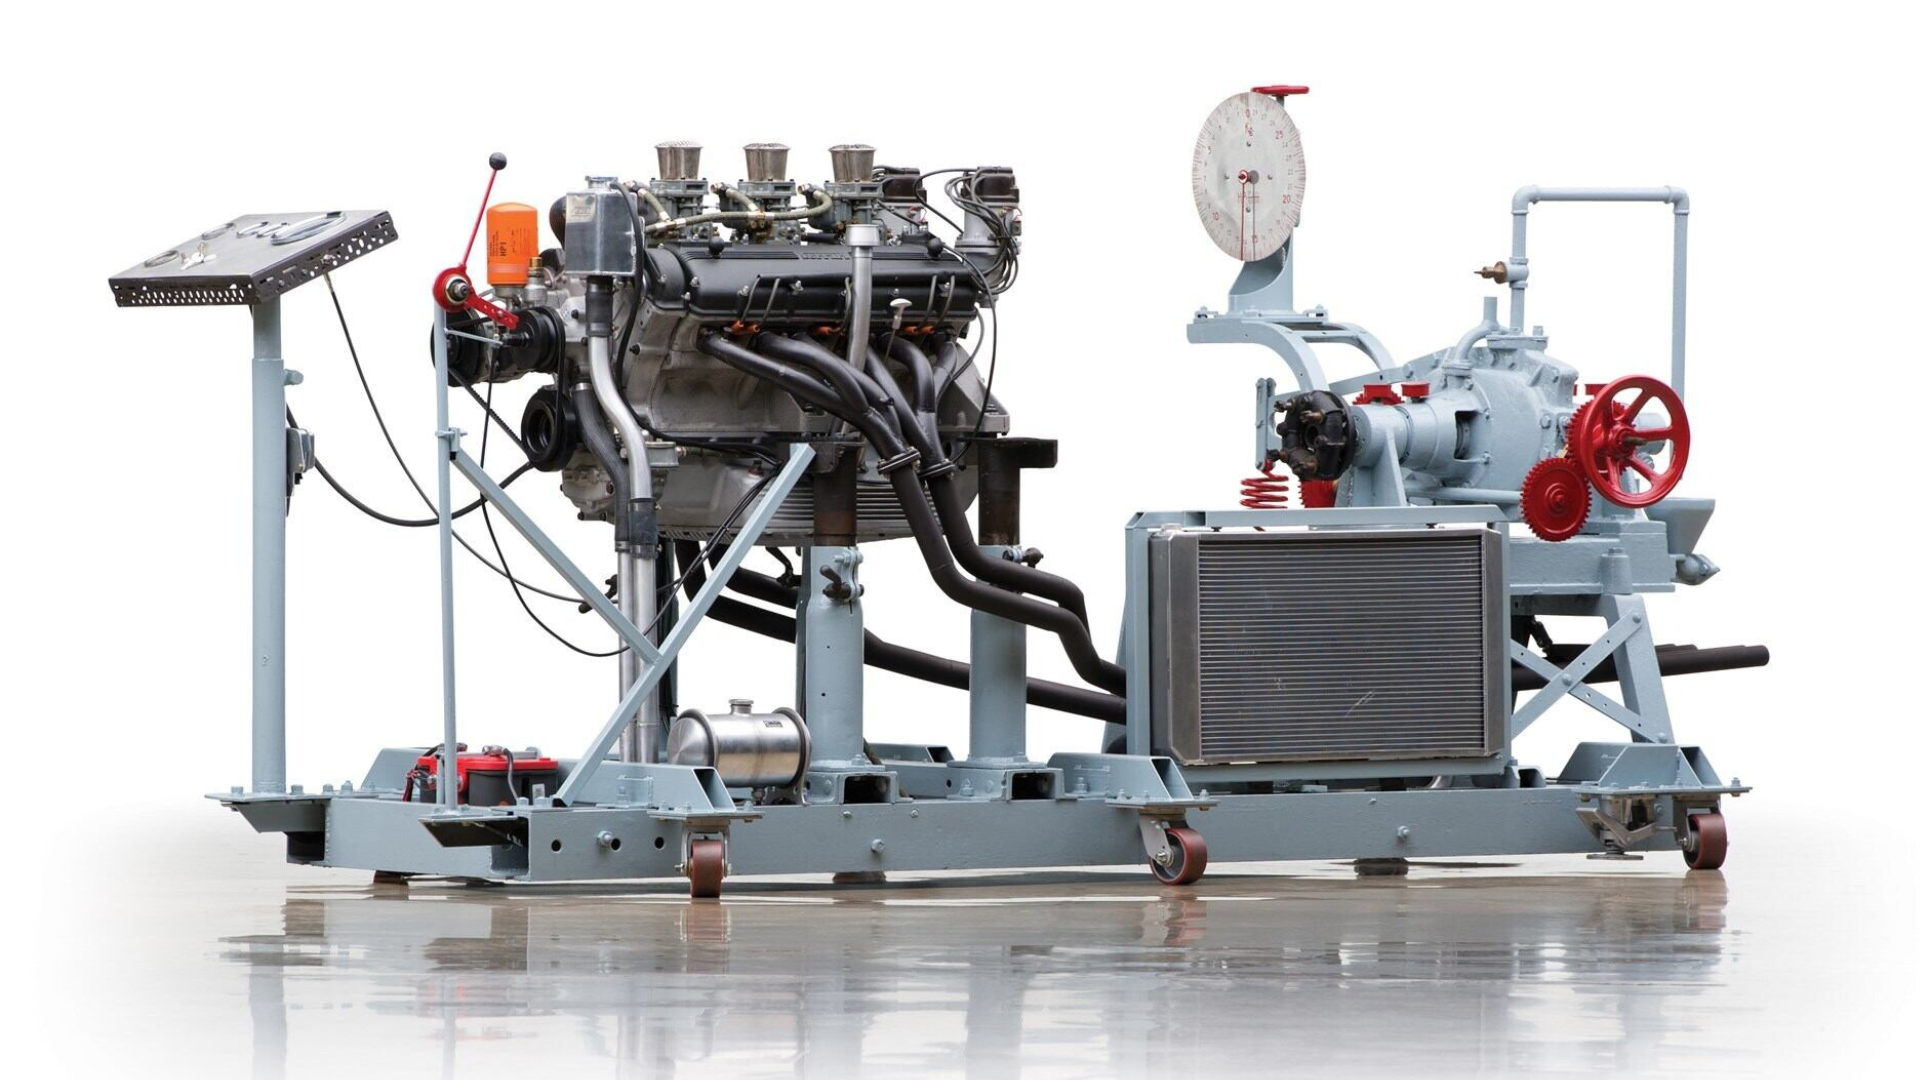 functional ferrari engine dyno heads to auction with a 4.0l v12 attached